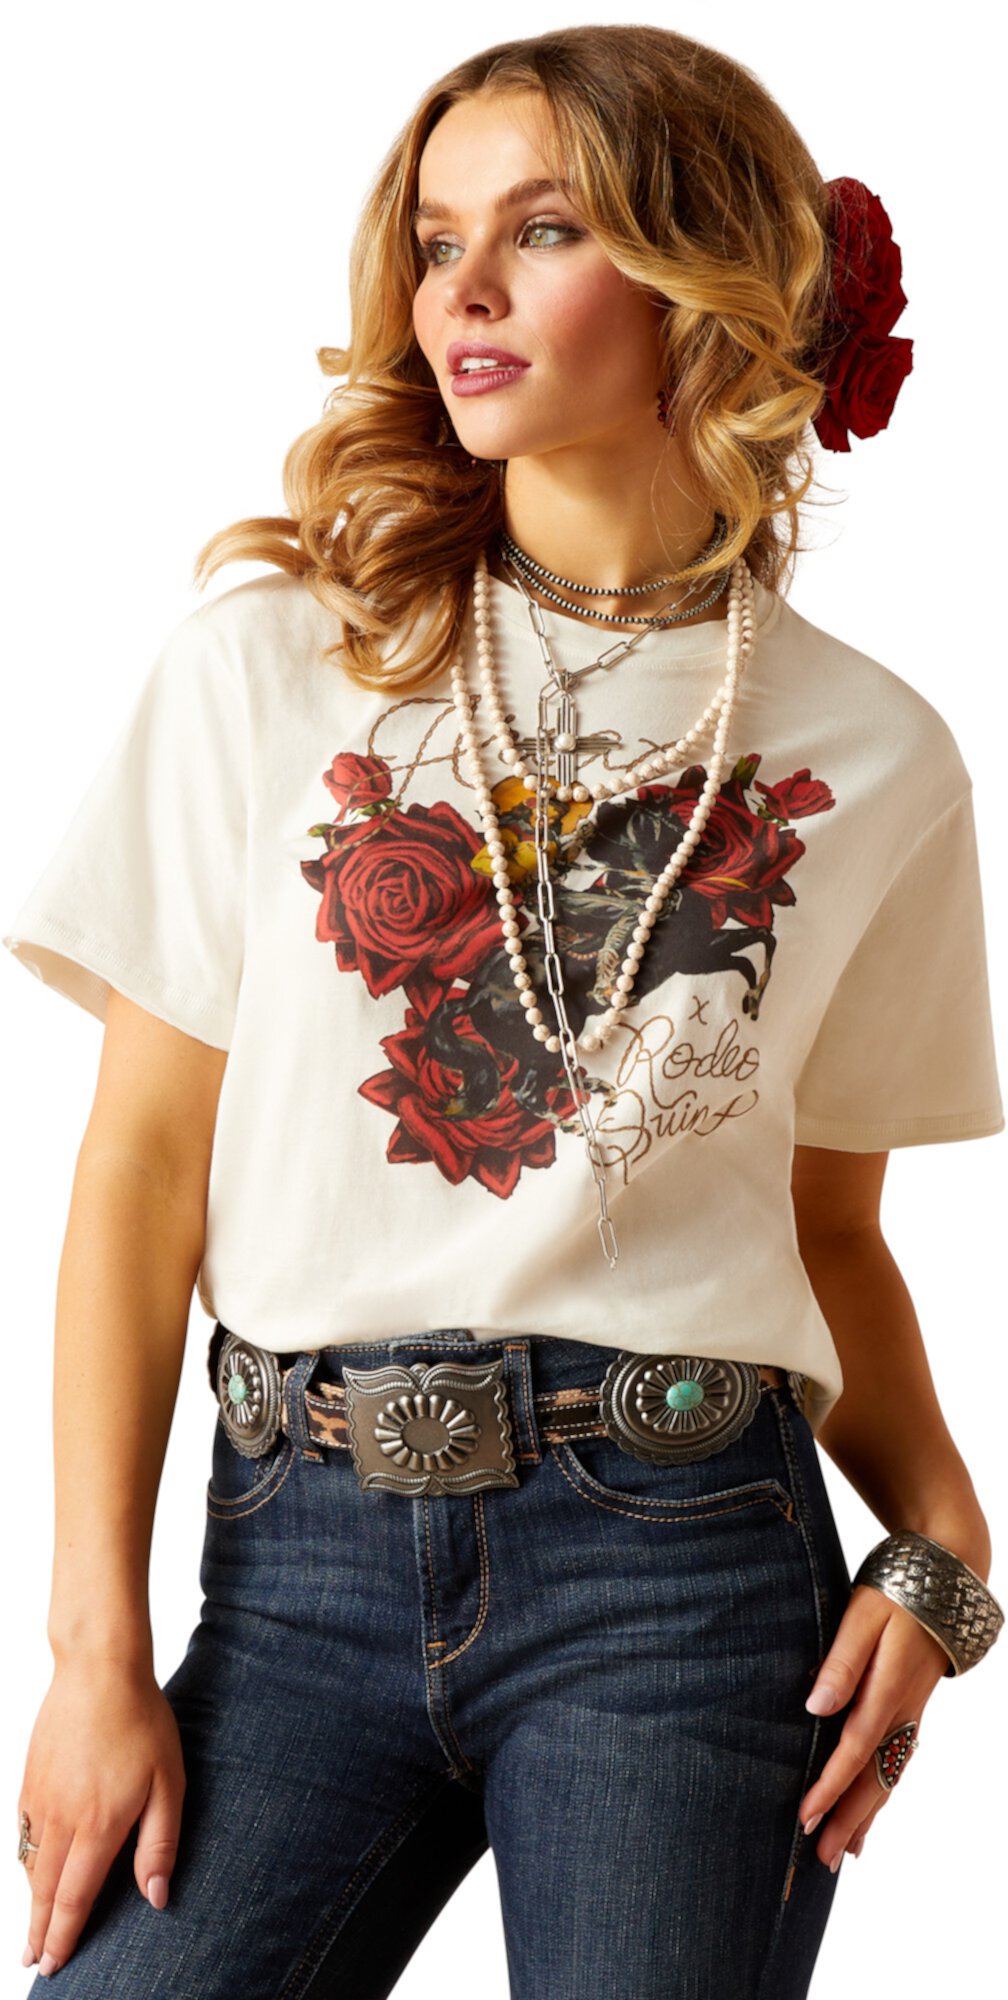 Happy Trails Rodeo Quincy T-Shirt Ariat